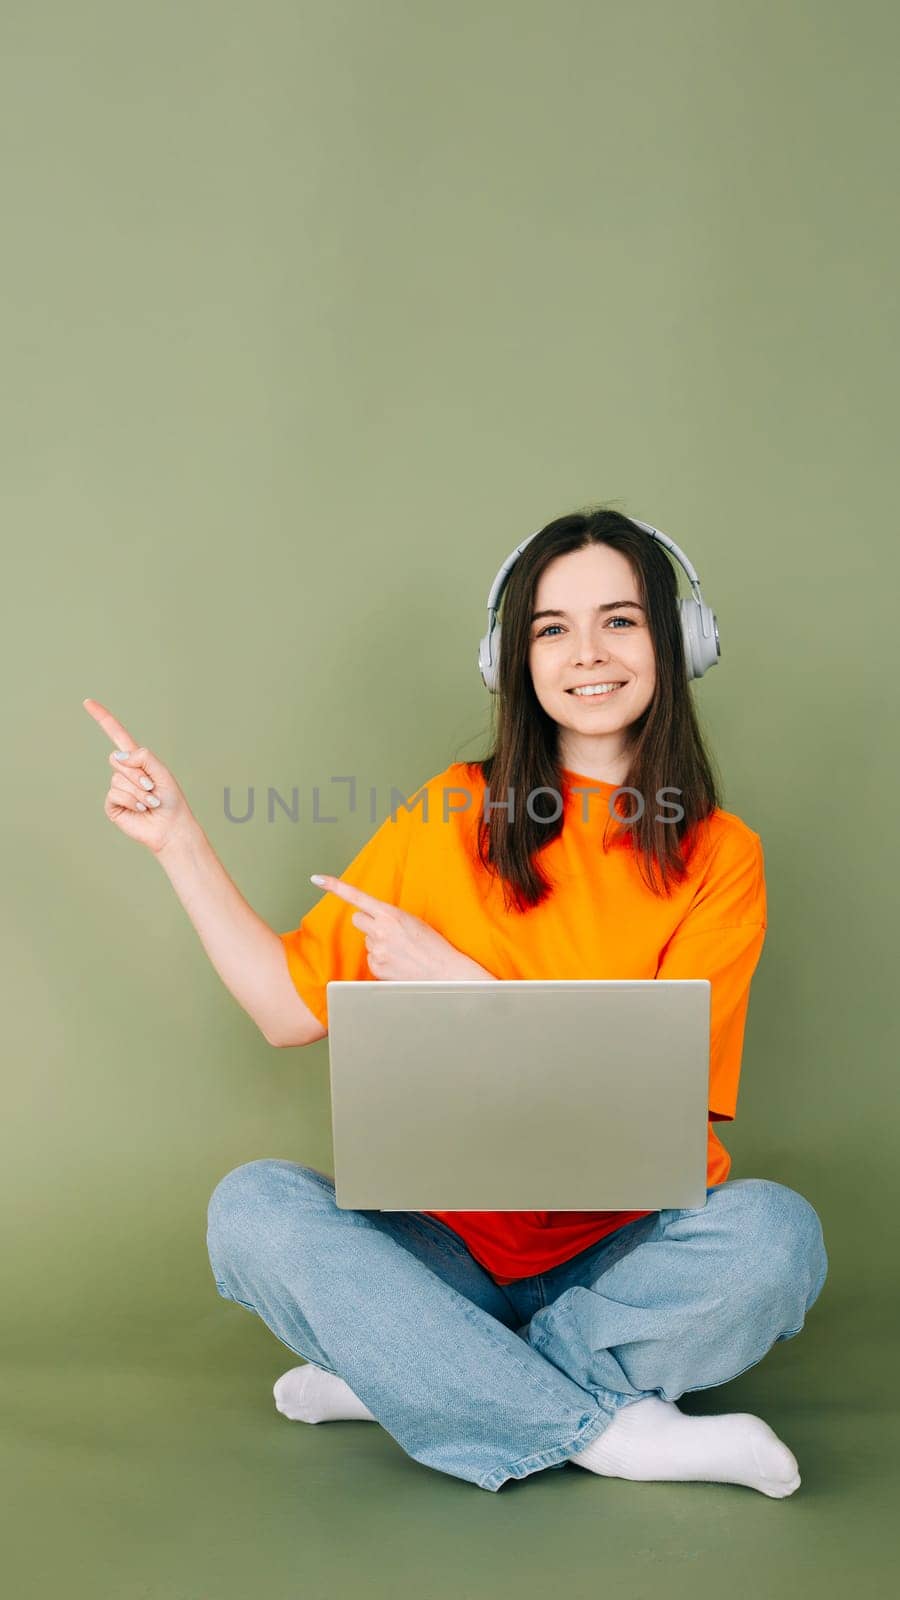 Young professional woman confidently working on laptop, pointing to empty space for text and advertising. Isolated on green background. Perfect for business and technology concepts